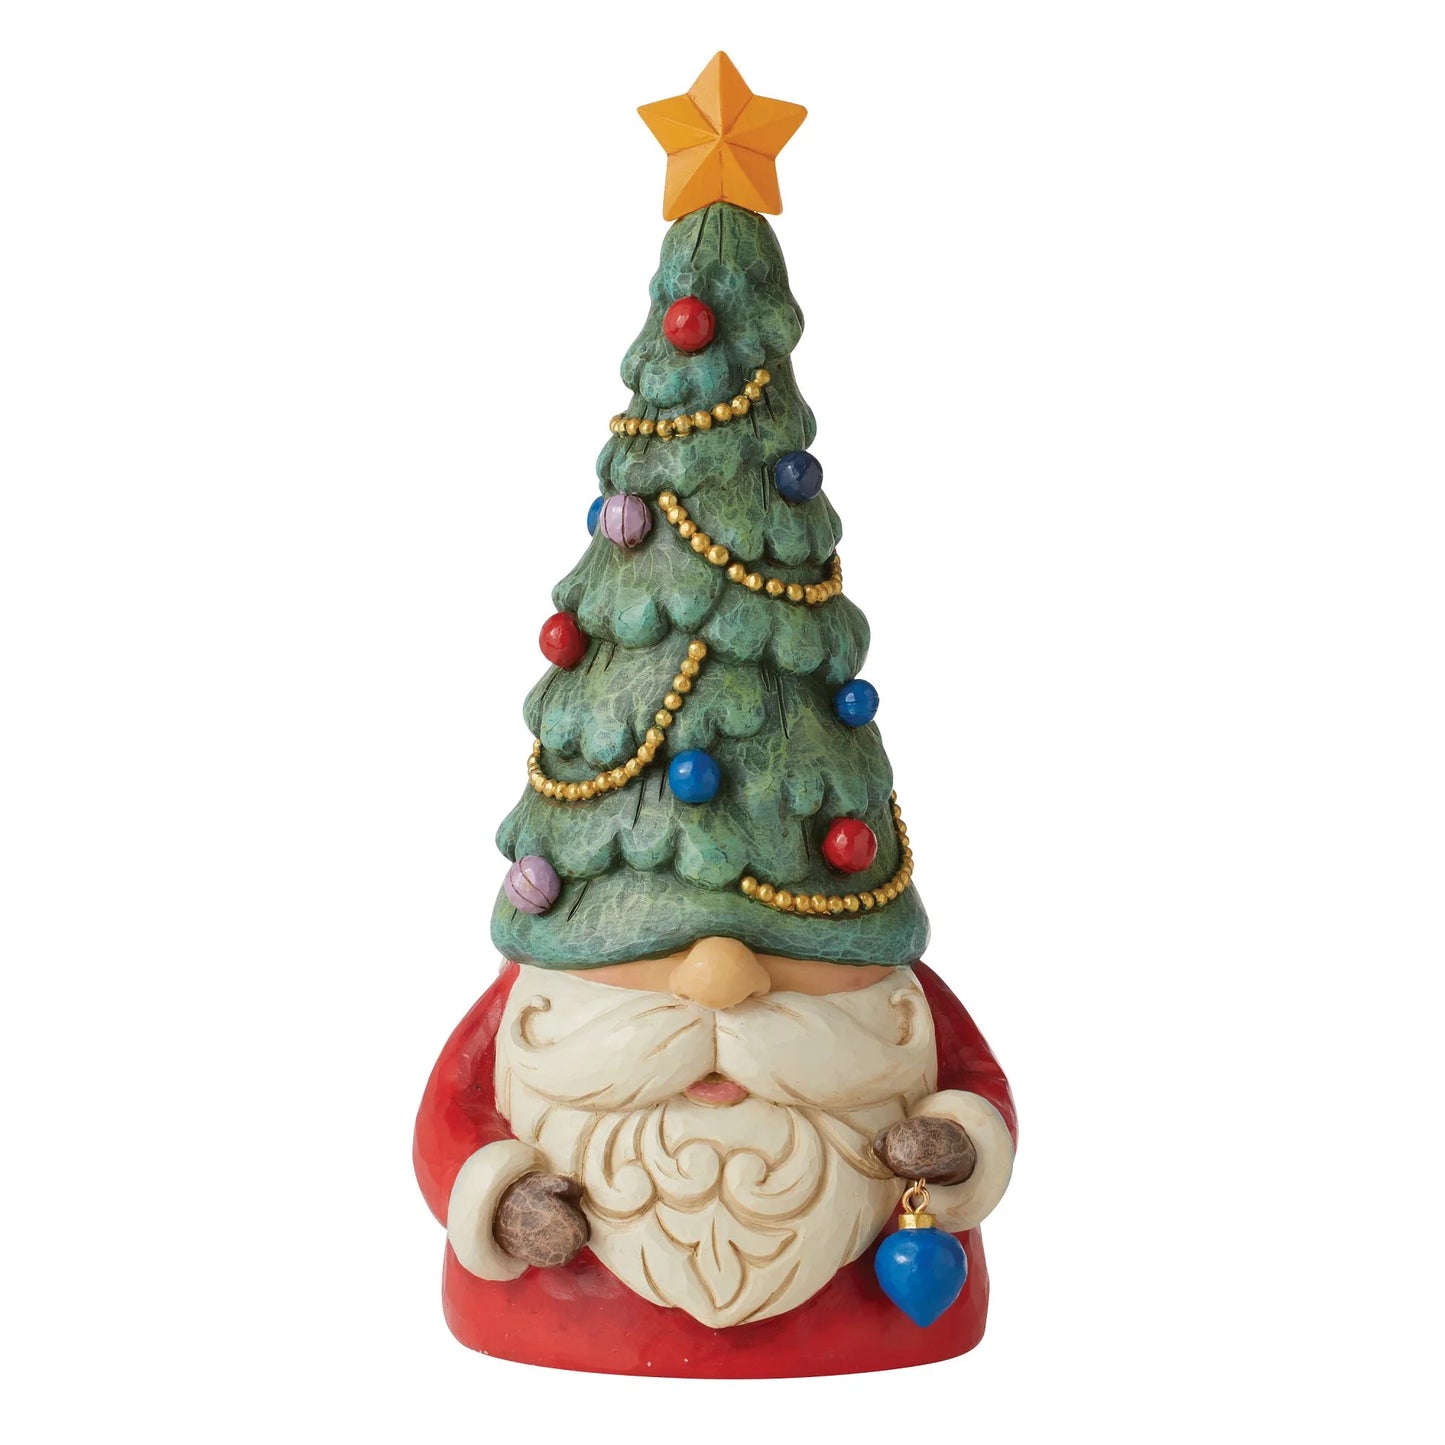 Let Your Joy Shine Bright - Lighted Christmas Tree Gnome Light-up Figurine